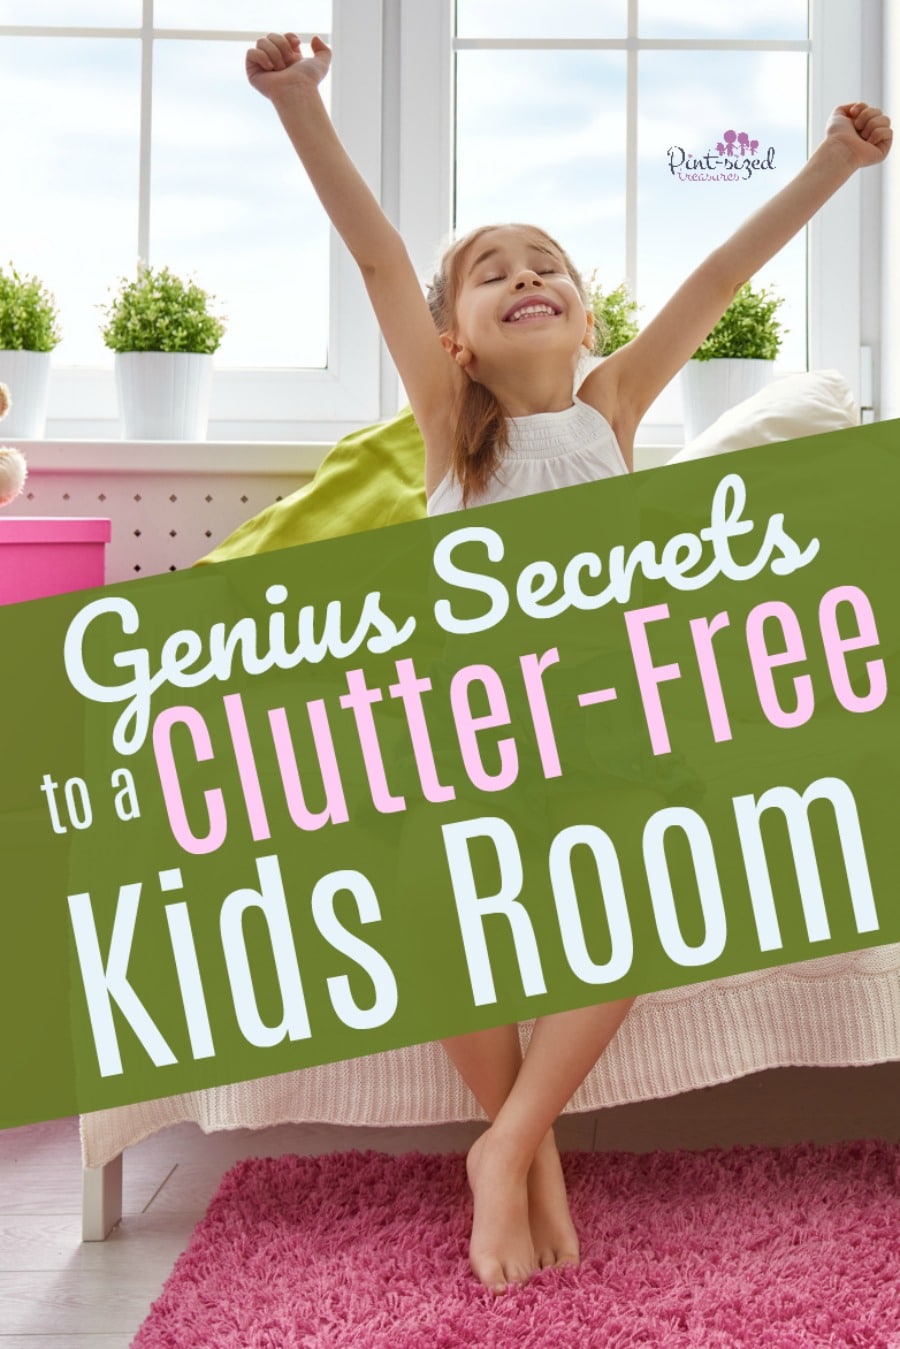 Struggling with a cluttered kids bedroom? We're sharing our GENIUS secrets to a clutter-free kids room that are super simple but powerful! #parenting #clutterfree #declutter #parentinghack #organzingmyhome #cleanhome #cleankidsroom #declutterwithkids